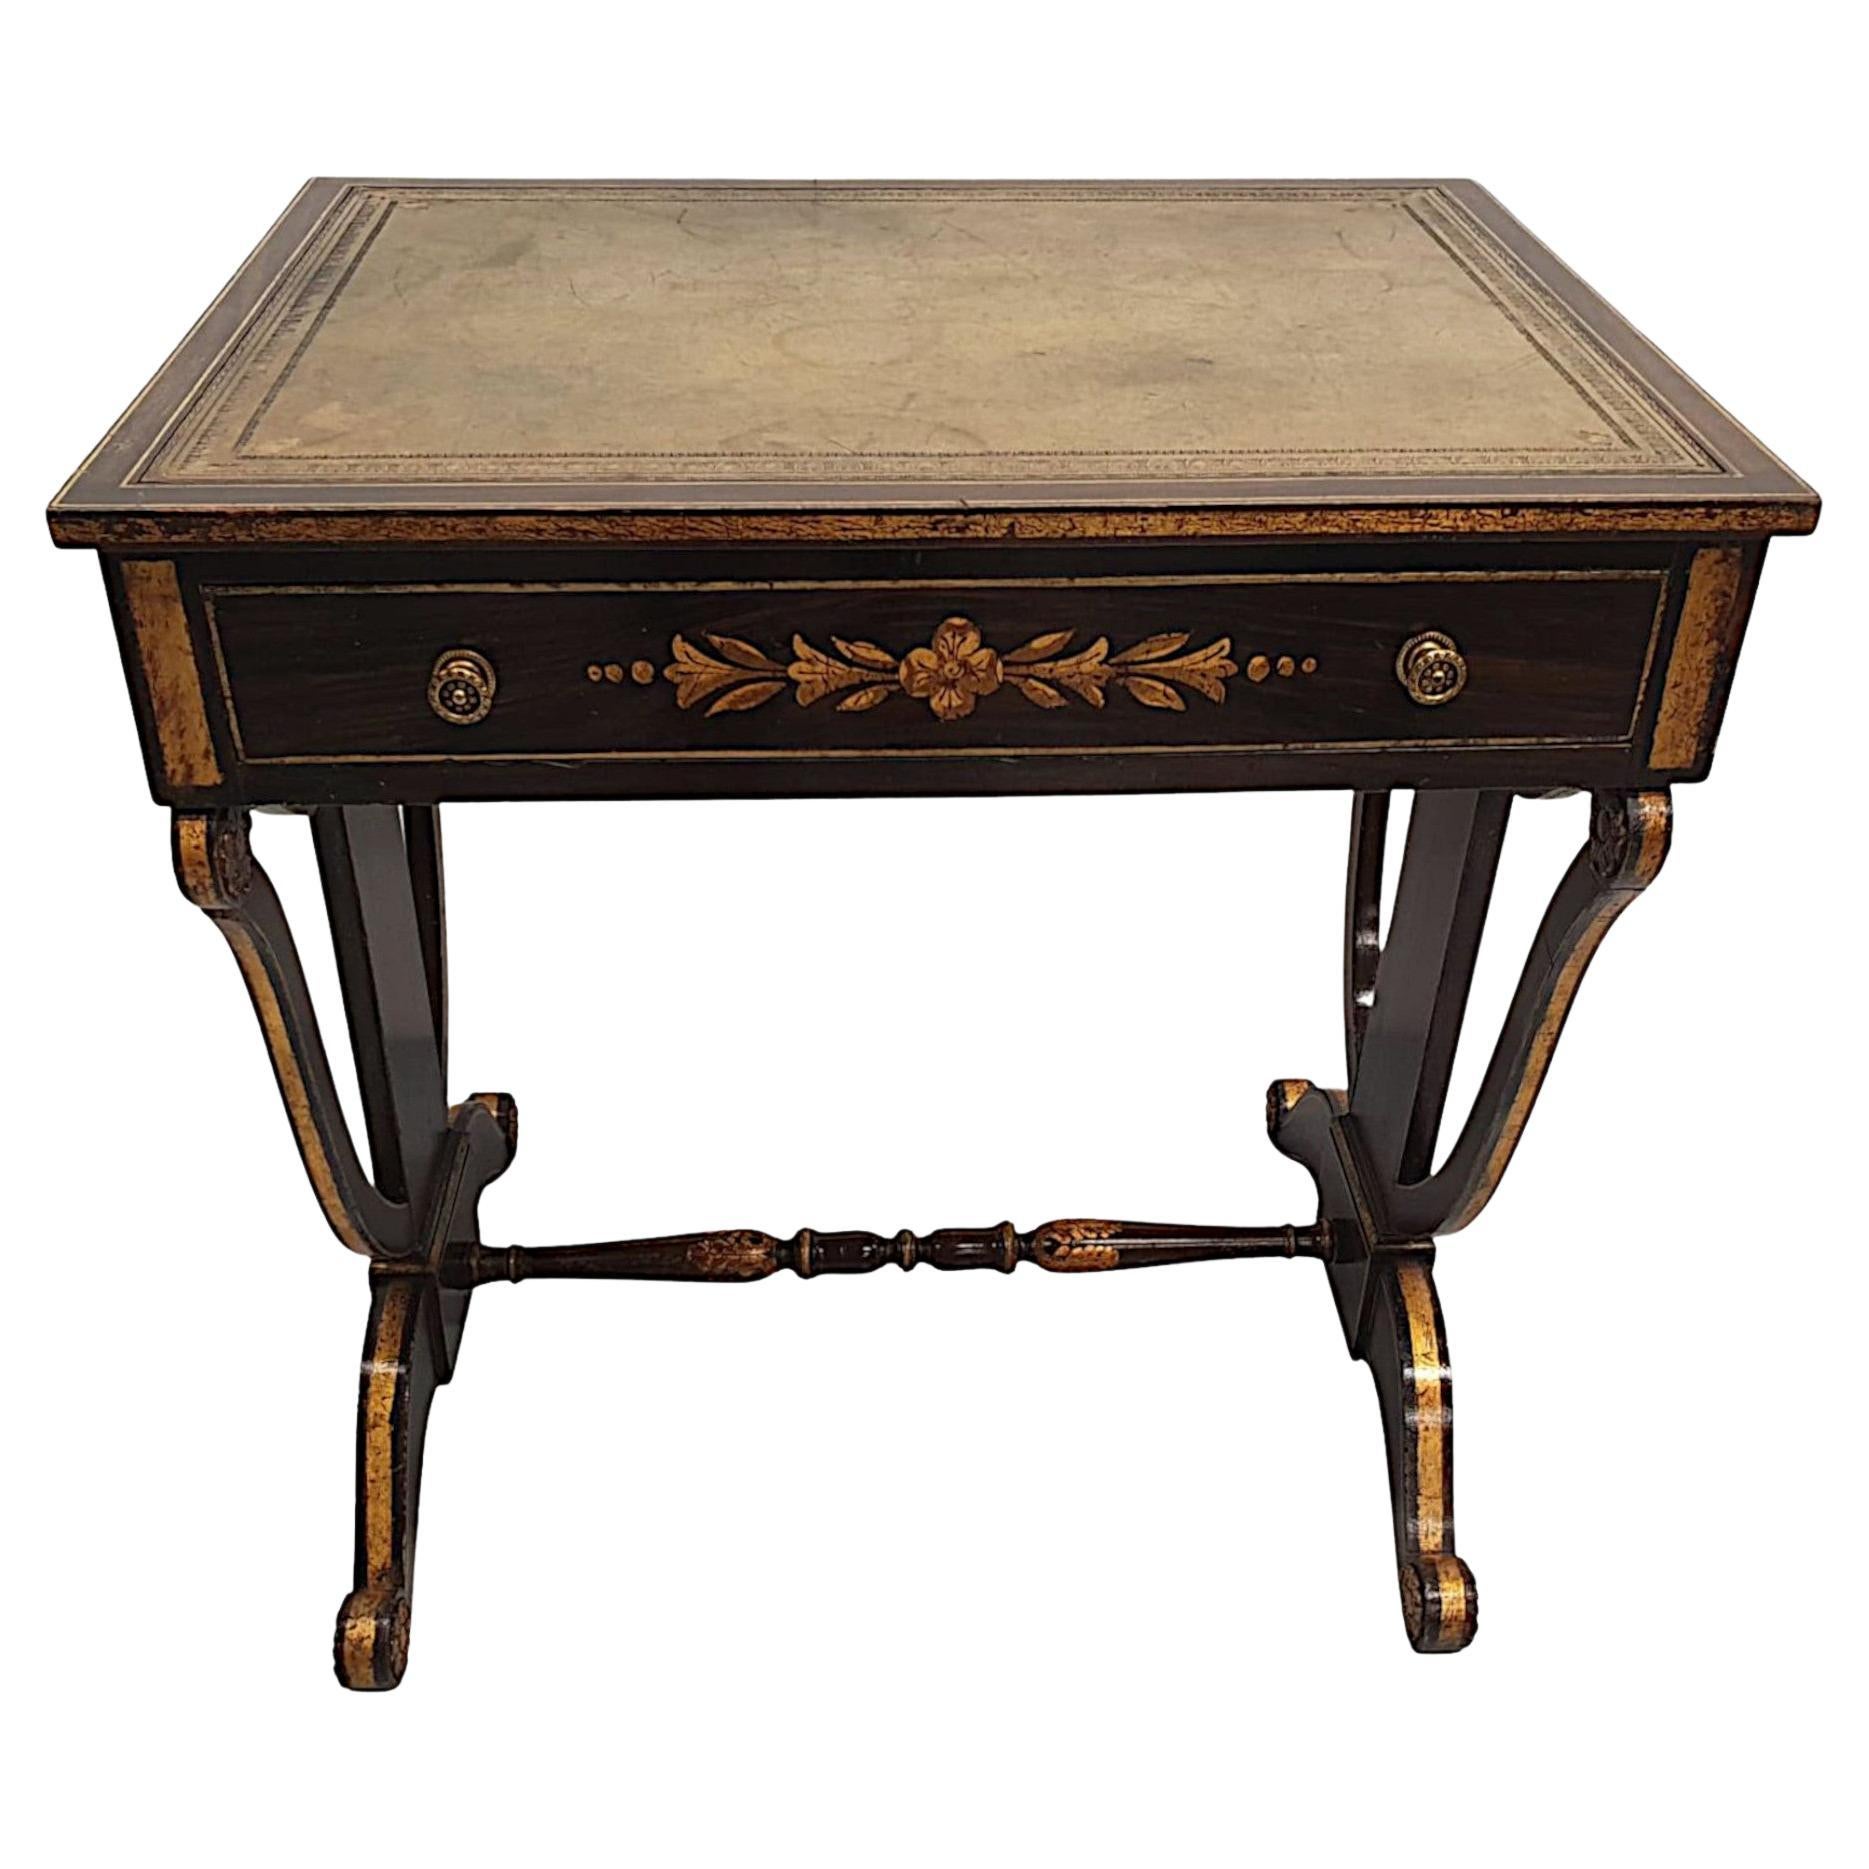 Rare Early 19th Century American Baltimore Federal Parcel Gilt Writing Desk